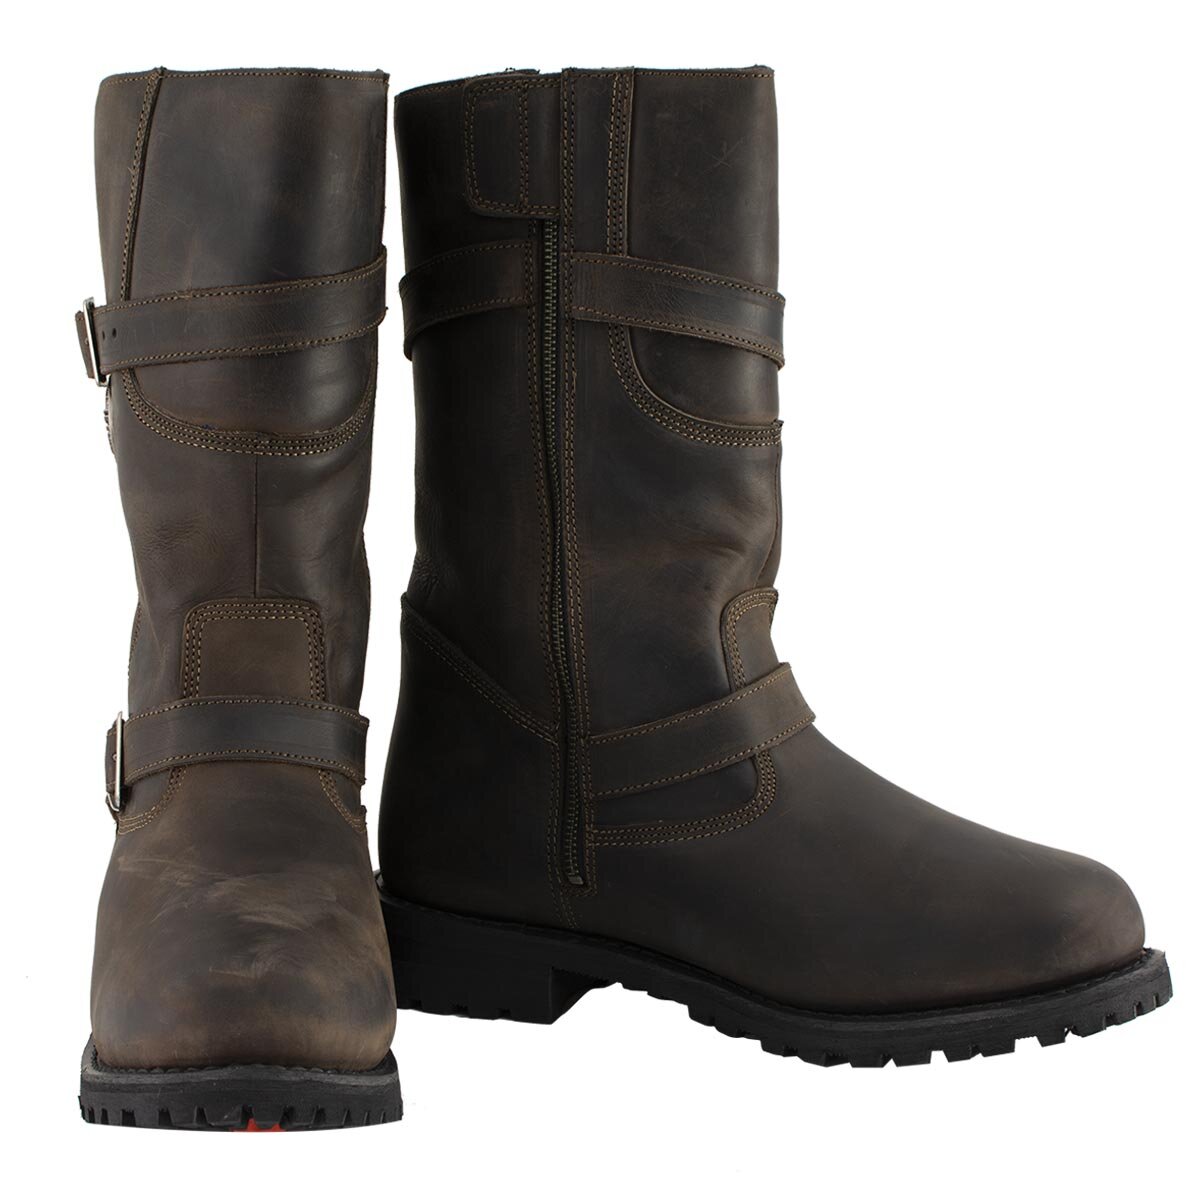 Men's Classic ‘Distressed Brown’ Engineer Boots